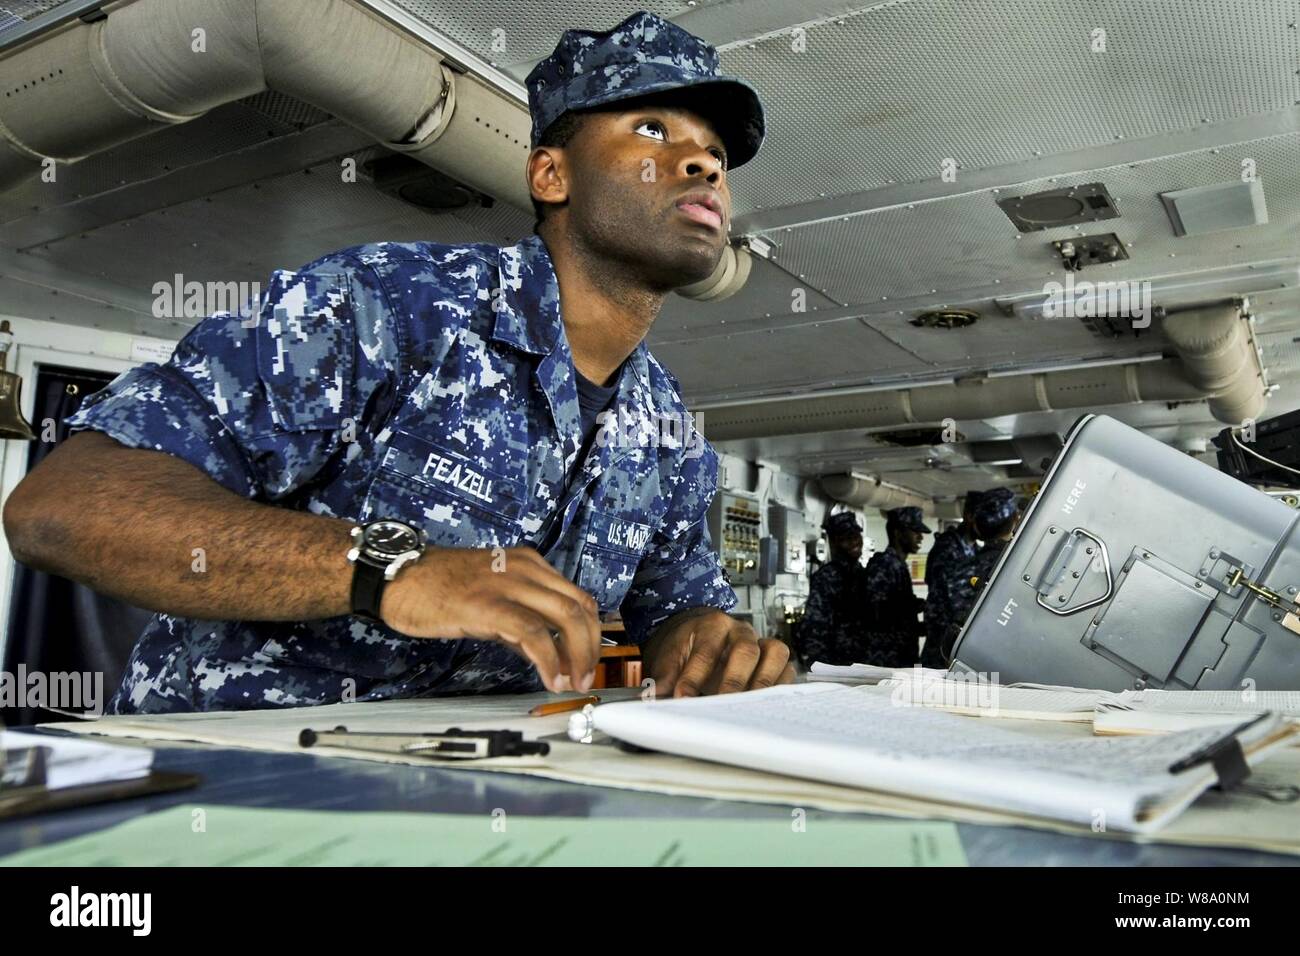 U.S. Navy Seaman Roosevelt Feazell charts a course from the bridge of the aircraft carrier USS Abraham Lincoln in the U.S. 7th Fleet area of responsibility as part of a deployment to the western Pacific and Indian Oceans.  The carrier is en route to support coalition efforts in the U.S. 5th Fleet area of responsibility. Stock Photo